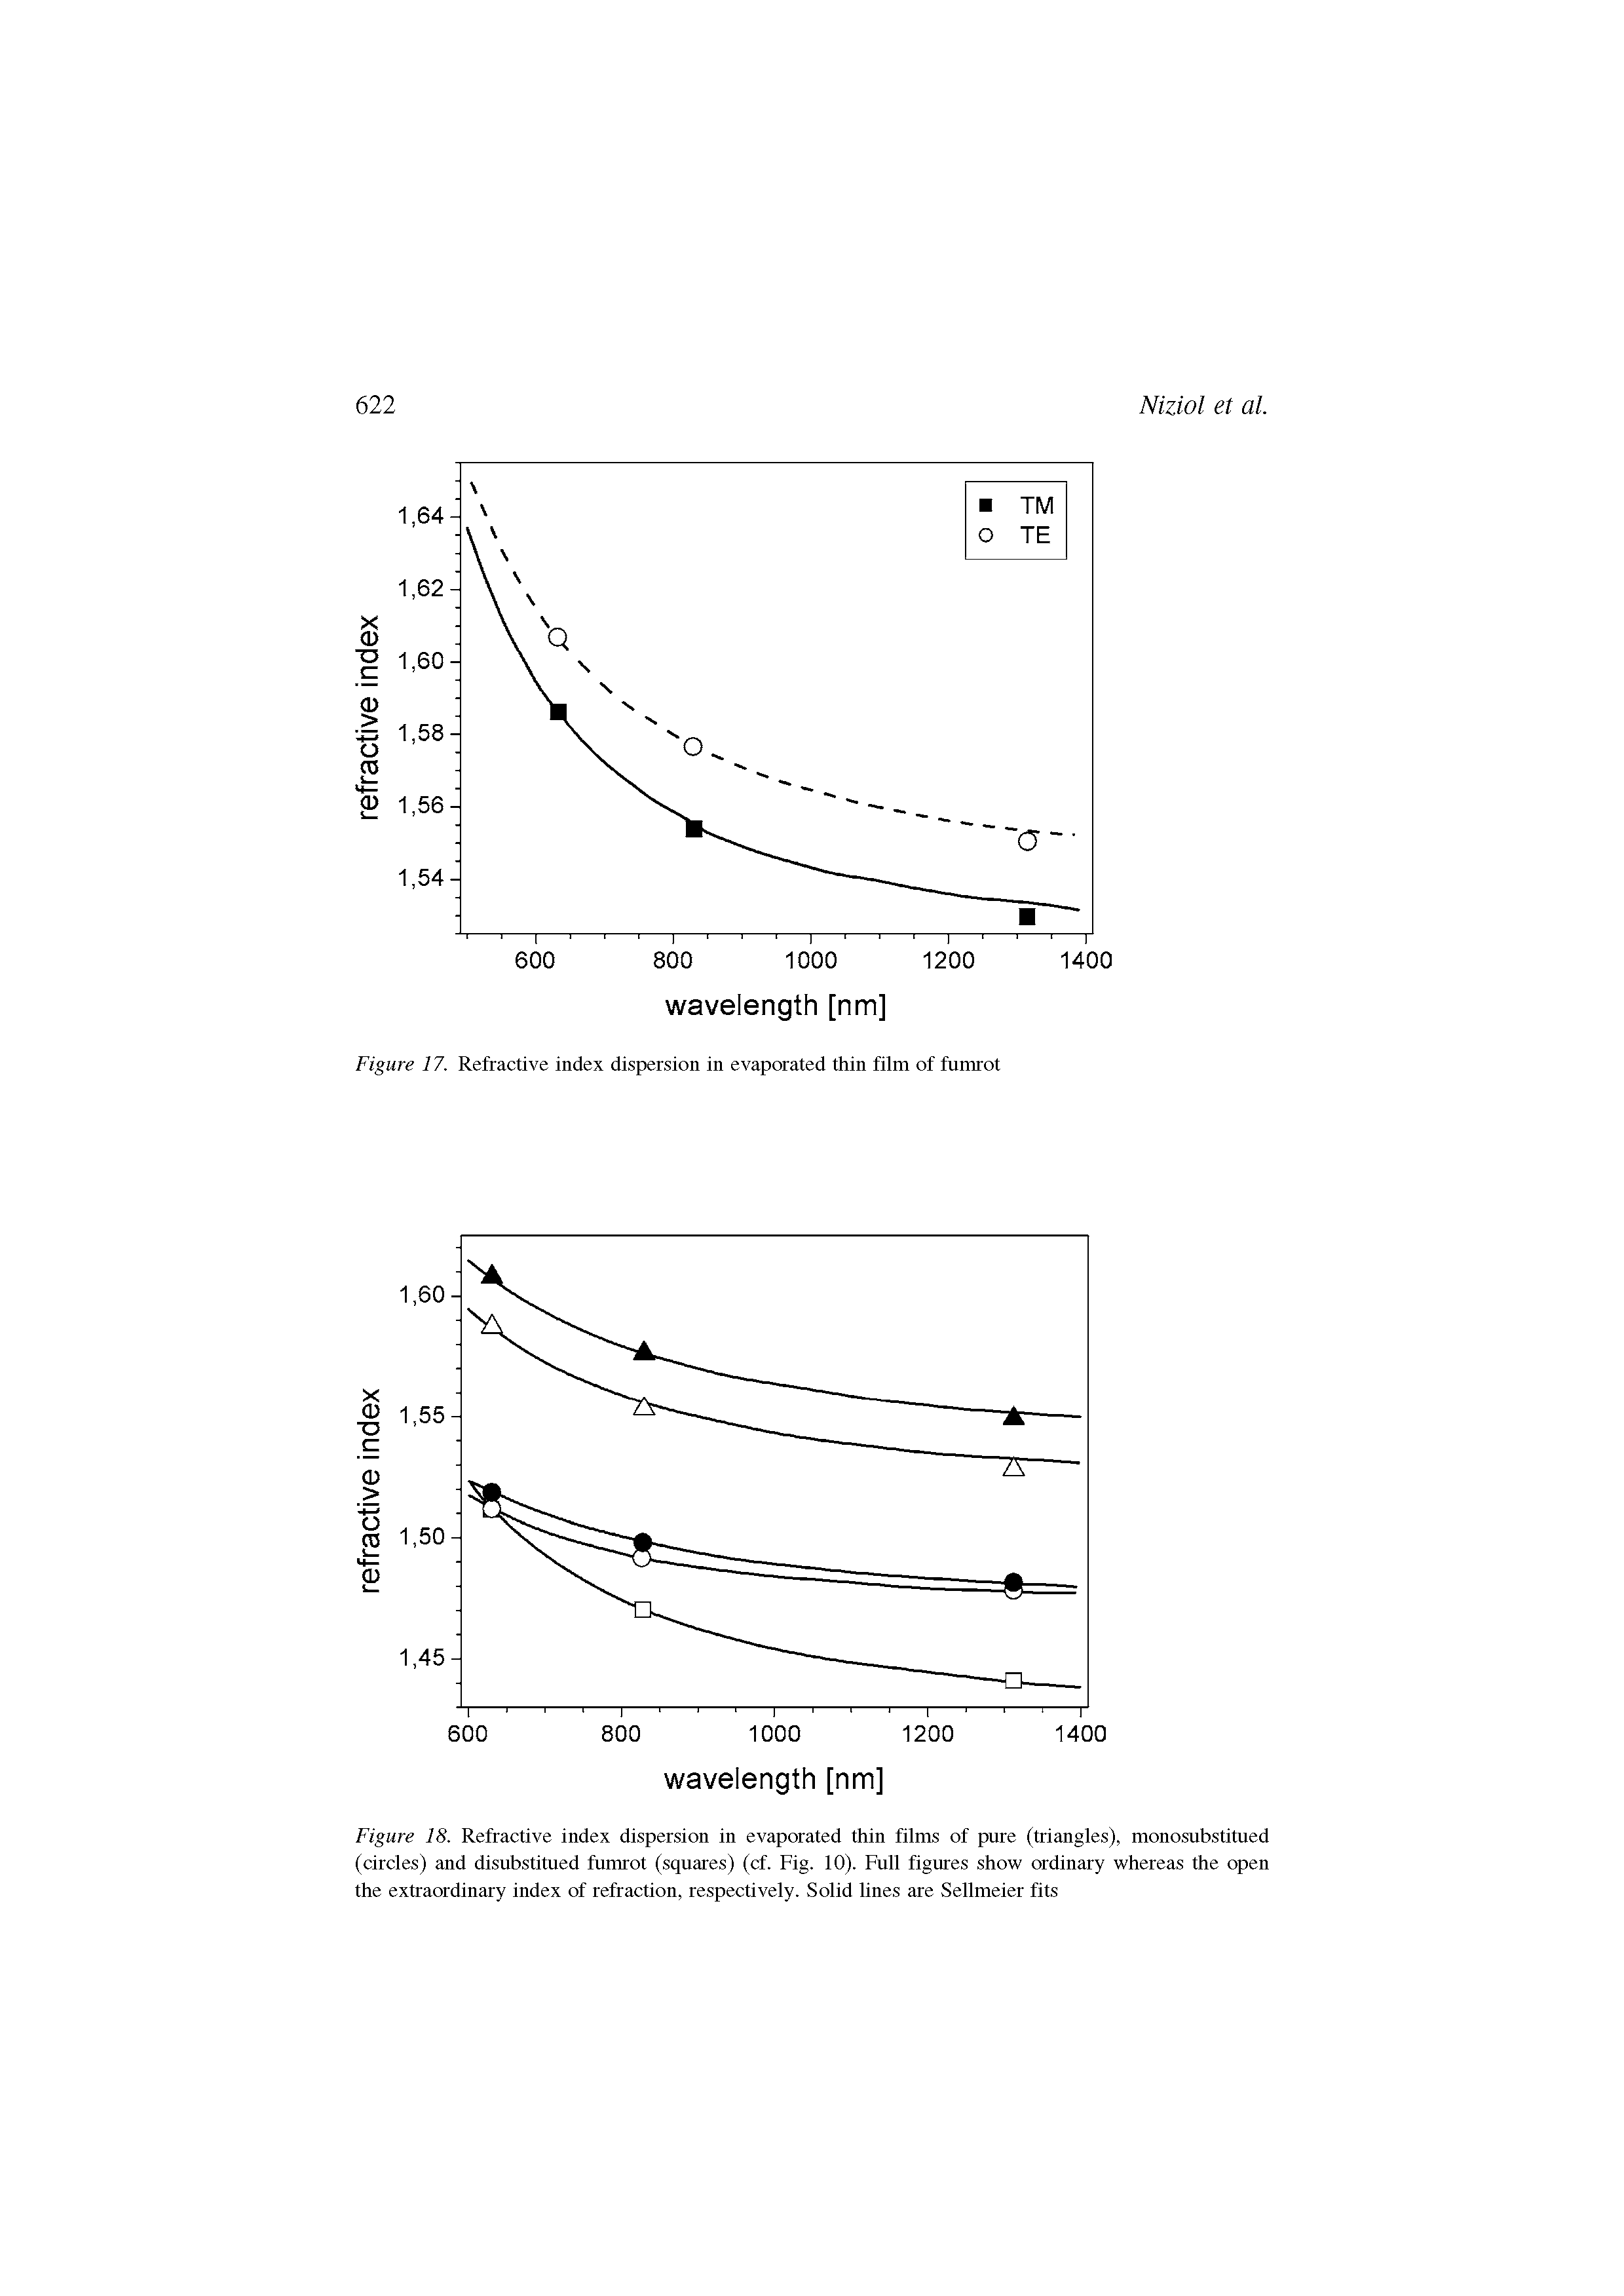 Figure 18. Refractive index dispersion in evaporated thin films of pure (triangles), monosubstitued (circles) and disubstitued fumrot (squares) (cf. Fig. 10). Full figures show ordinary whereas the open the extraordinary index of refraction, respectively. Solid lines are Sellmeier fits...